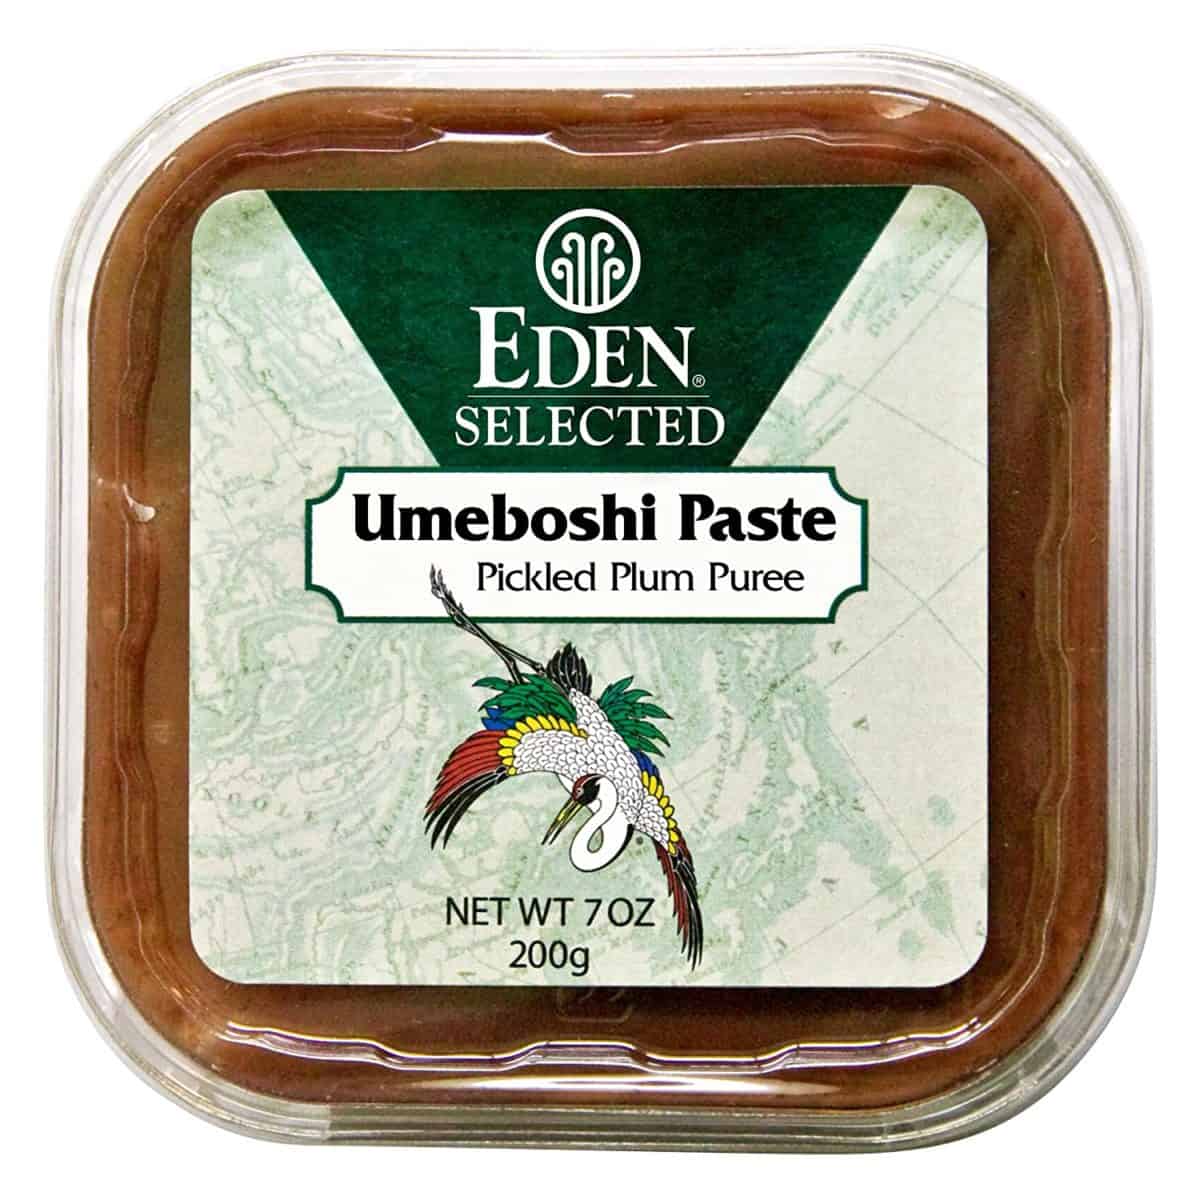 Eden umeboshi paste to use in cooking, sauces and dressing